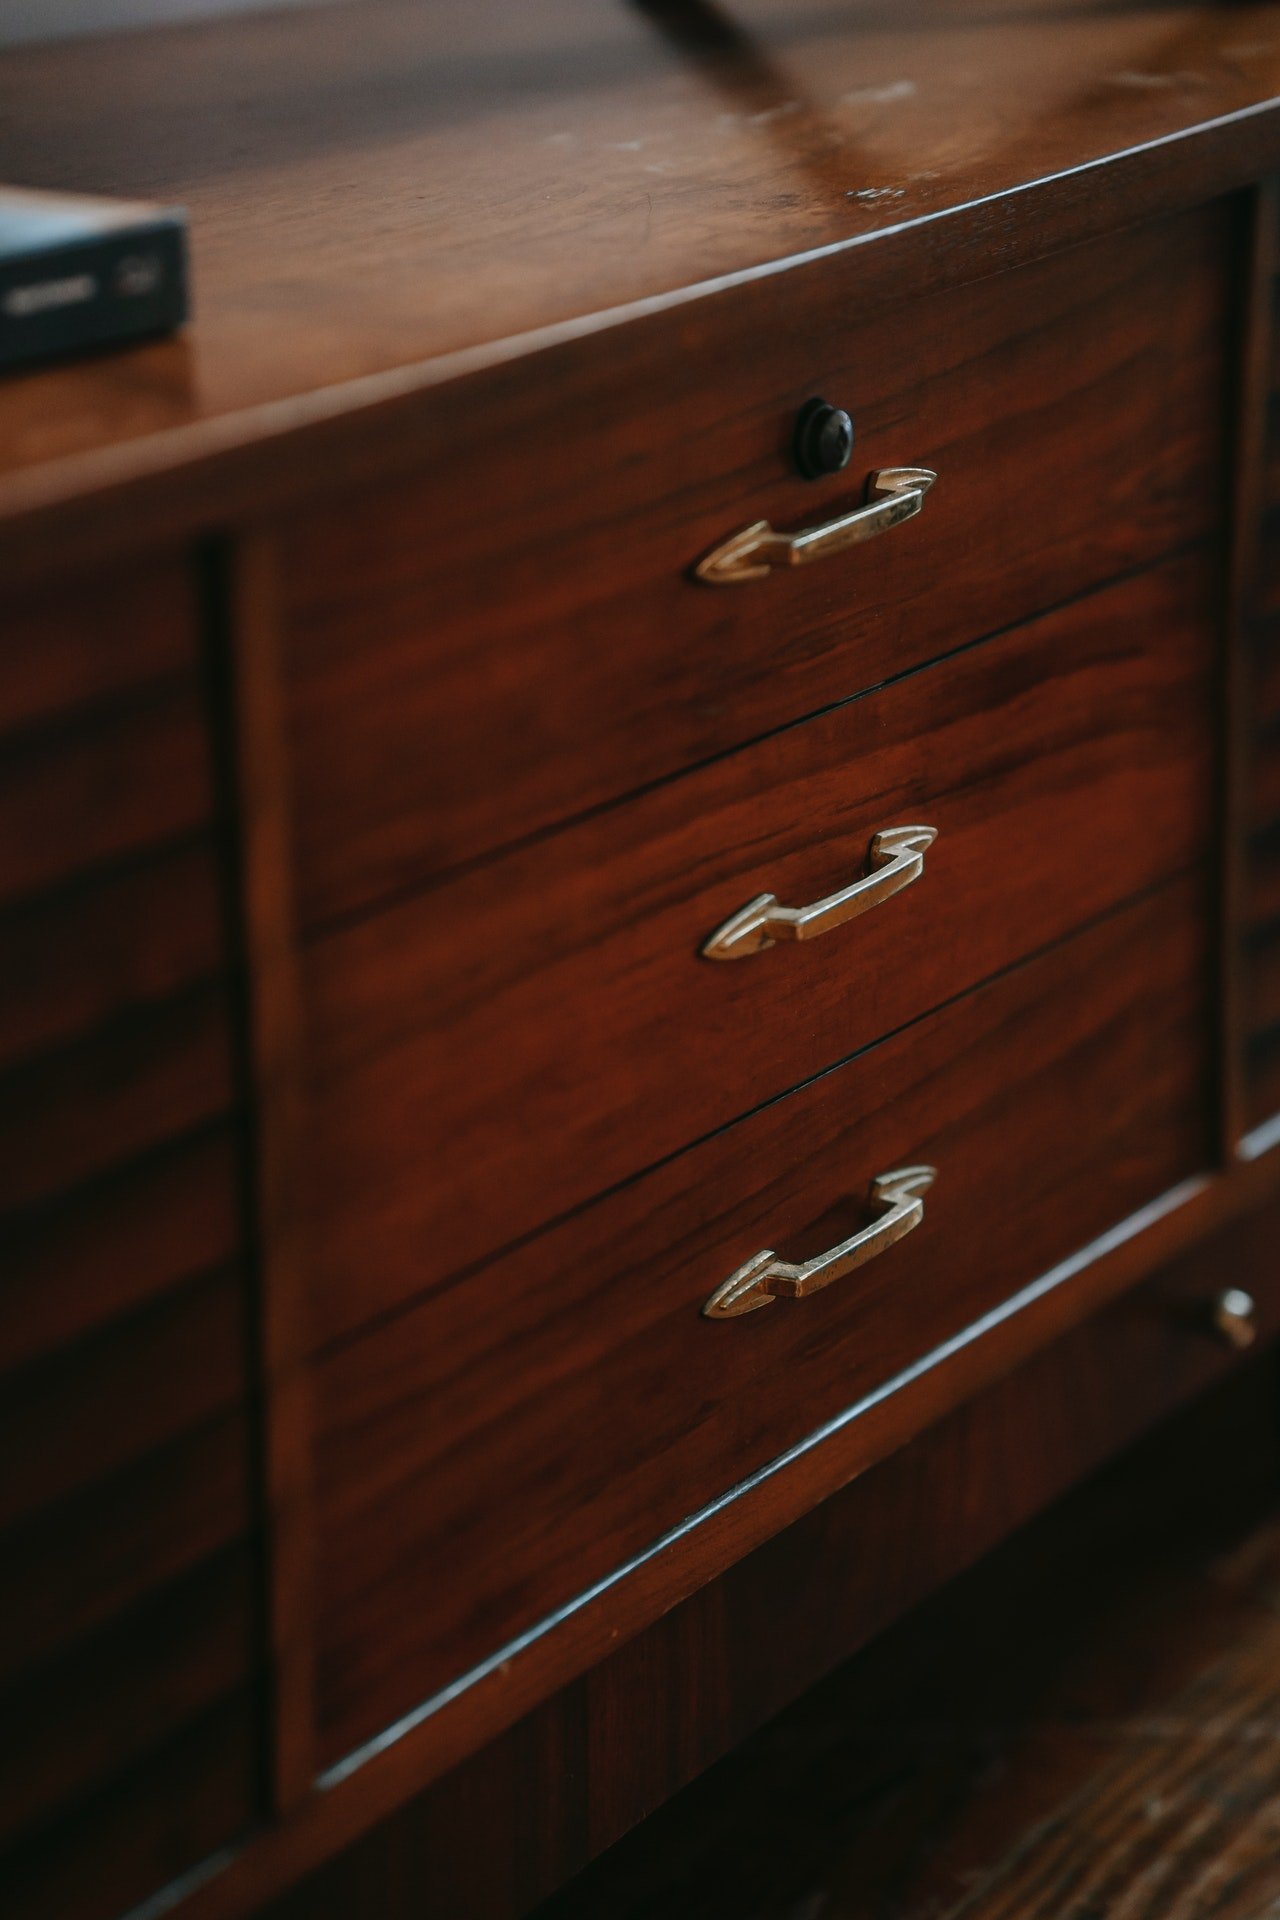 Amelia looked at the pictures on top of the dresser. | Source: Pexels